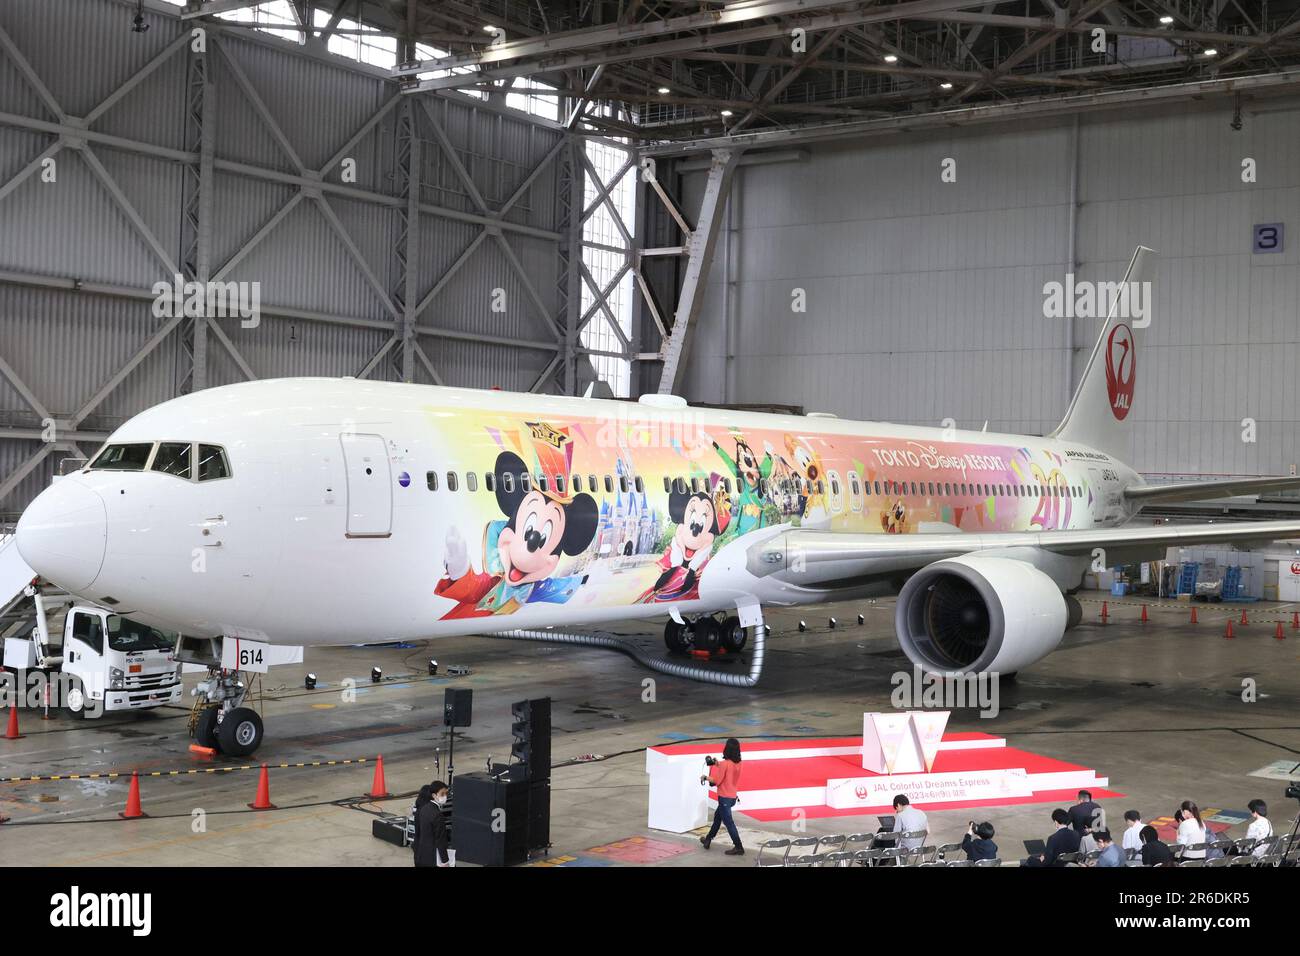 Tokyo, Japan. 9th June, 2023. Japan Airlines (JAL) and Tokyo Disney Resort operator Oriental Land display the 'JAL Colorful Dreams Express' jetliner to celebrate the Disneyland's 40th anniversary at a JAL hangar at the Haneda airport in Tokyo on Friday, June 9, 2023. The new Disney characters designed Boeing 767 launched JAL's domestic routes. (photo by Yoshio Tsunoda/AFLO) Stock Photo